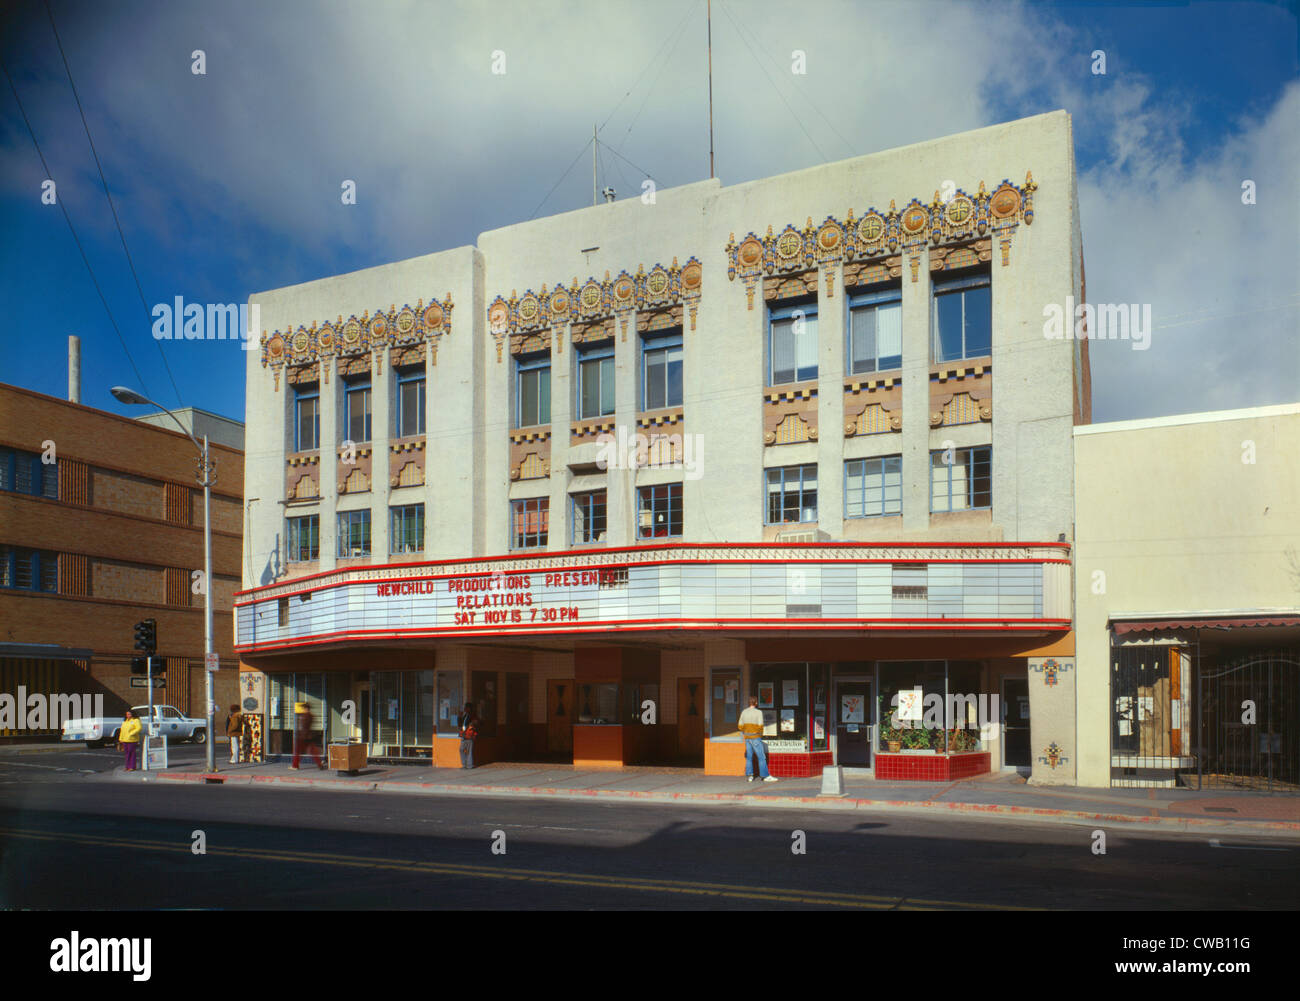 Movie Theaters, The Kimo Theater, marquee reads: 'Newchild Productions presents Relations Sat Nov 15 7:30 PM', photograph by Stock Photo